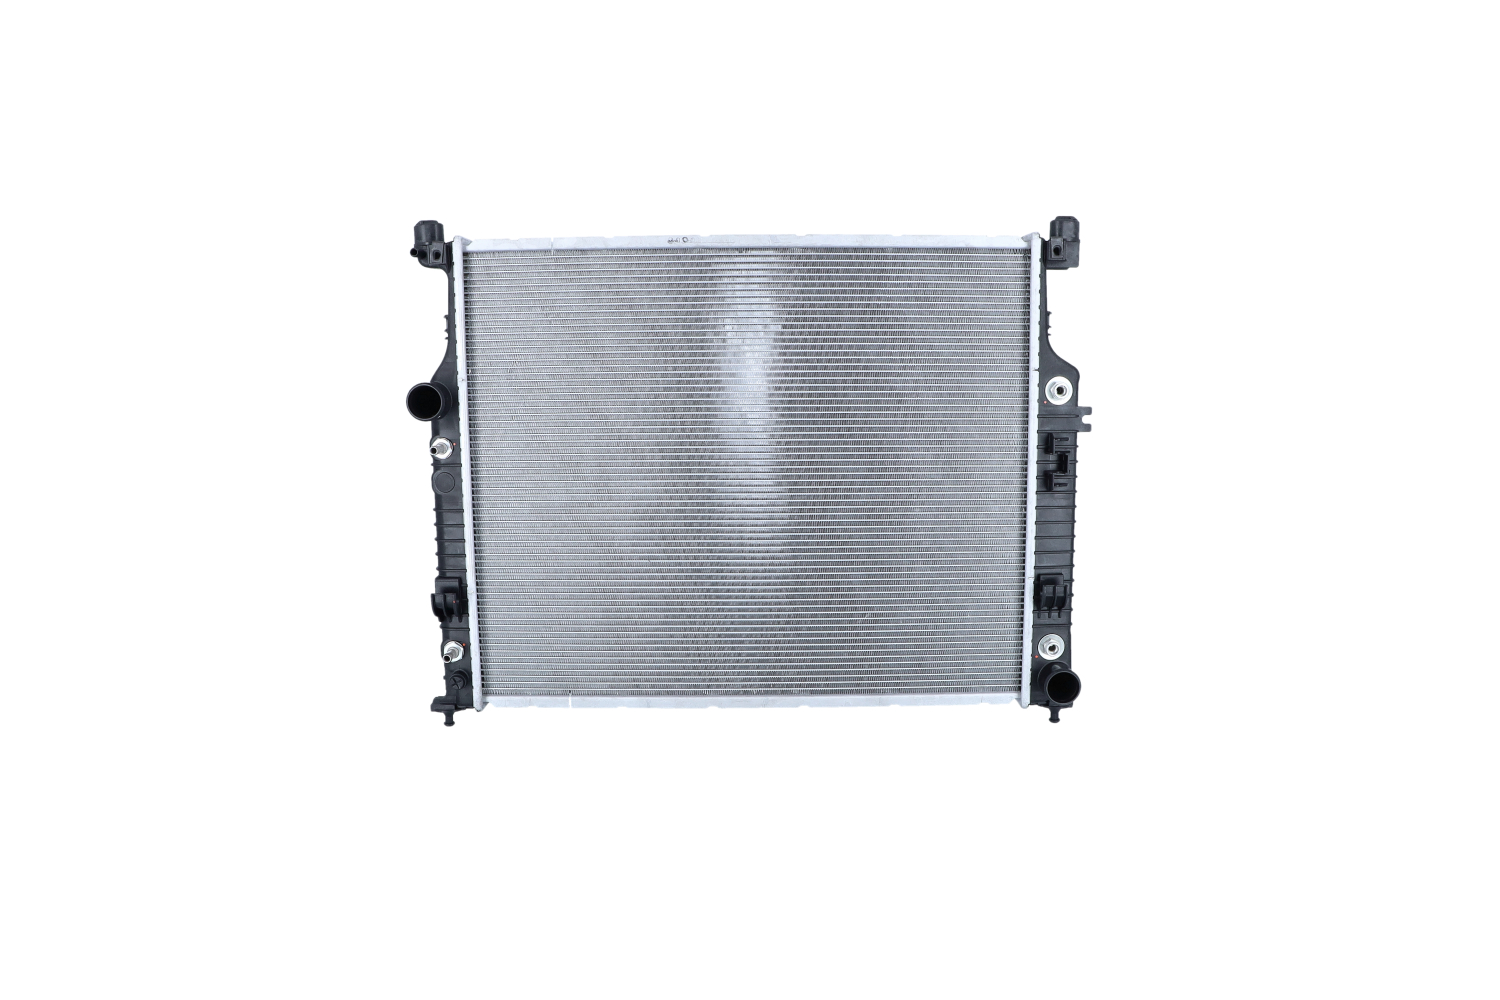 NRF 56074 Engine radiator Aluminium, 636 x 526 x 27 mm, with mounting parts, Brazed cooling fins